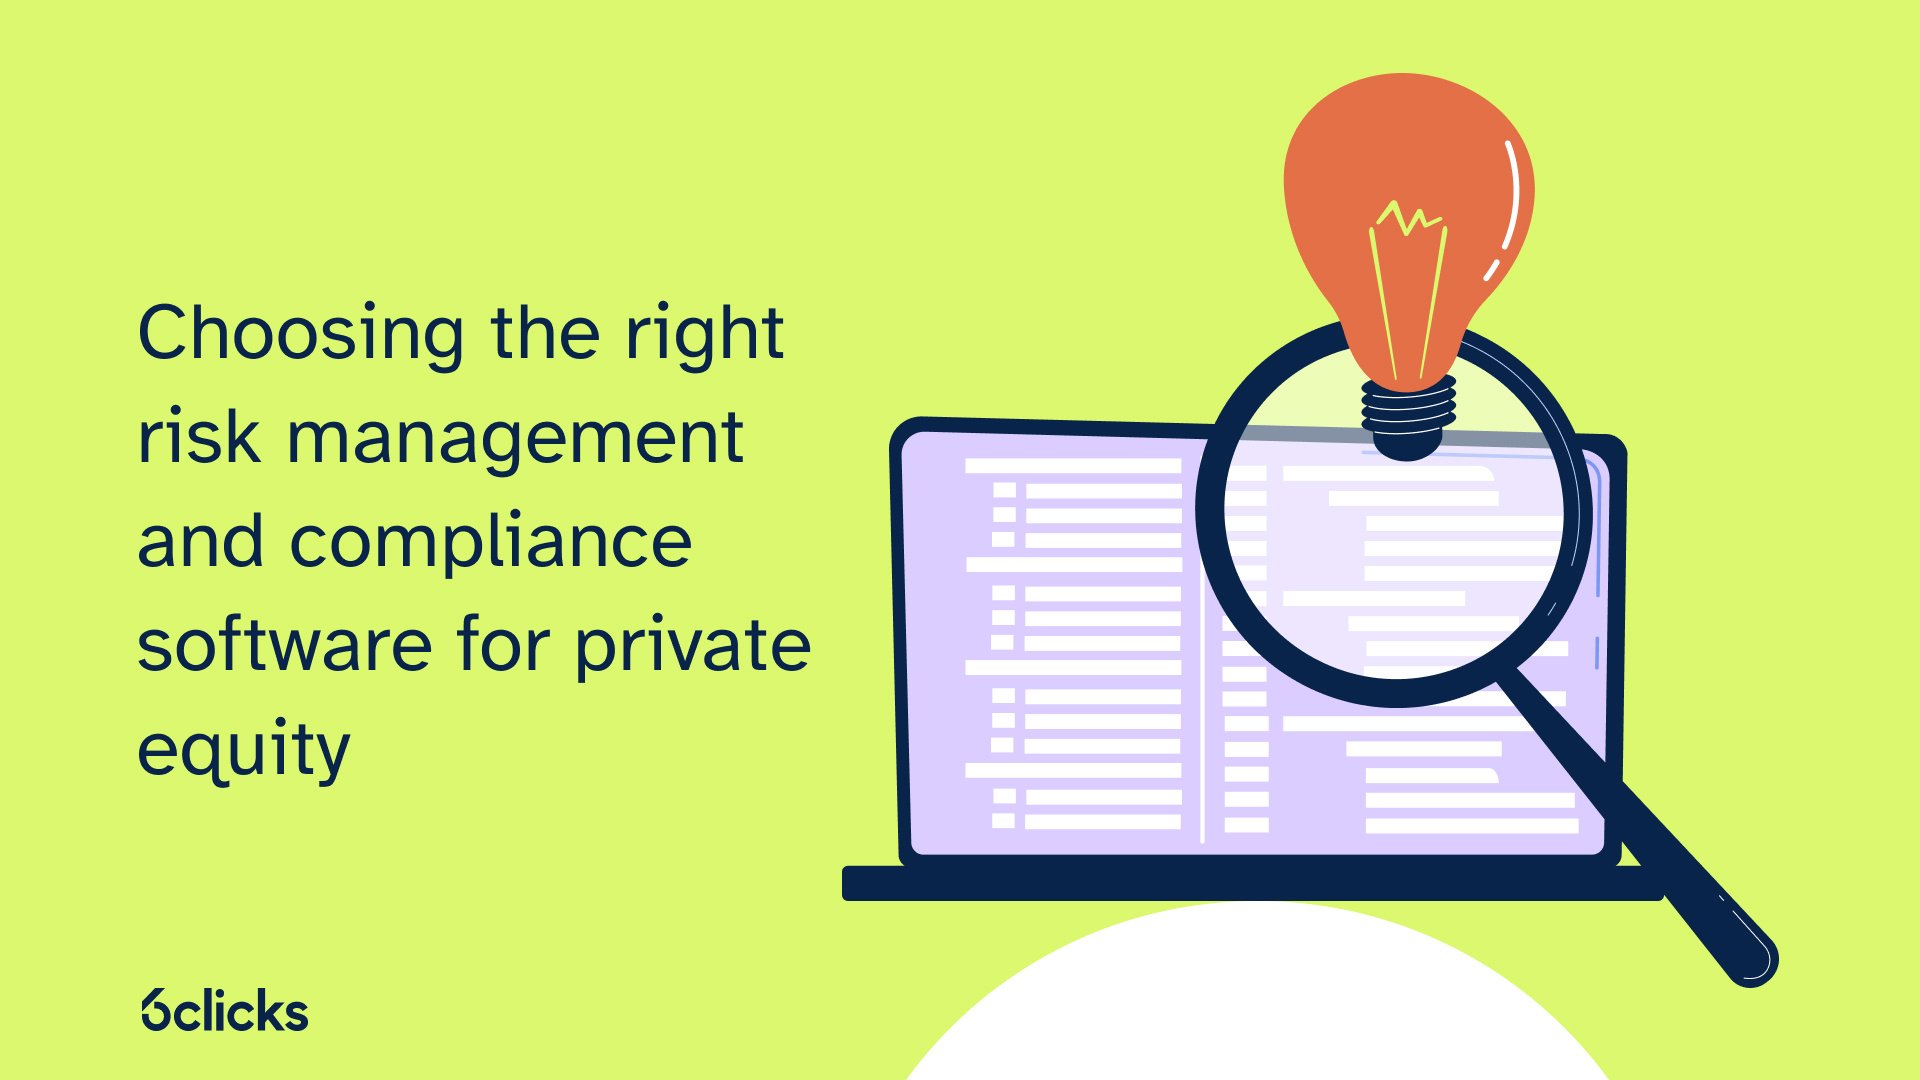 Choosing the right risk management and compliance software for private equity